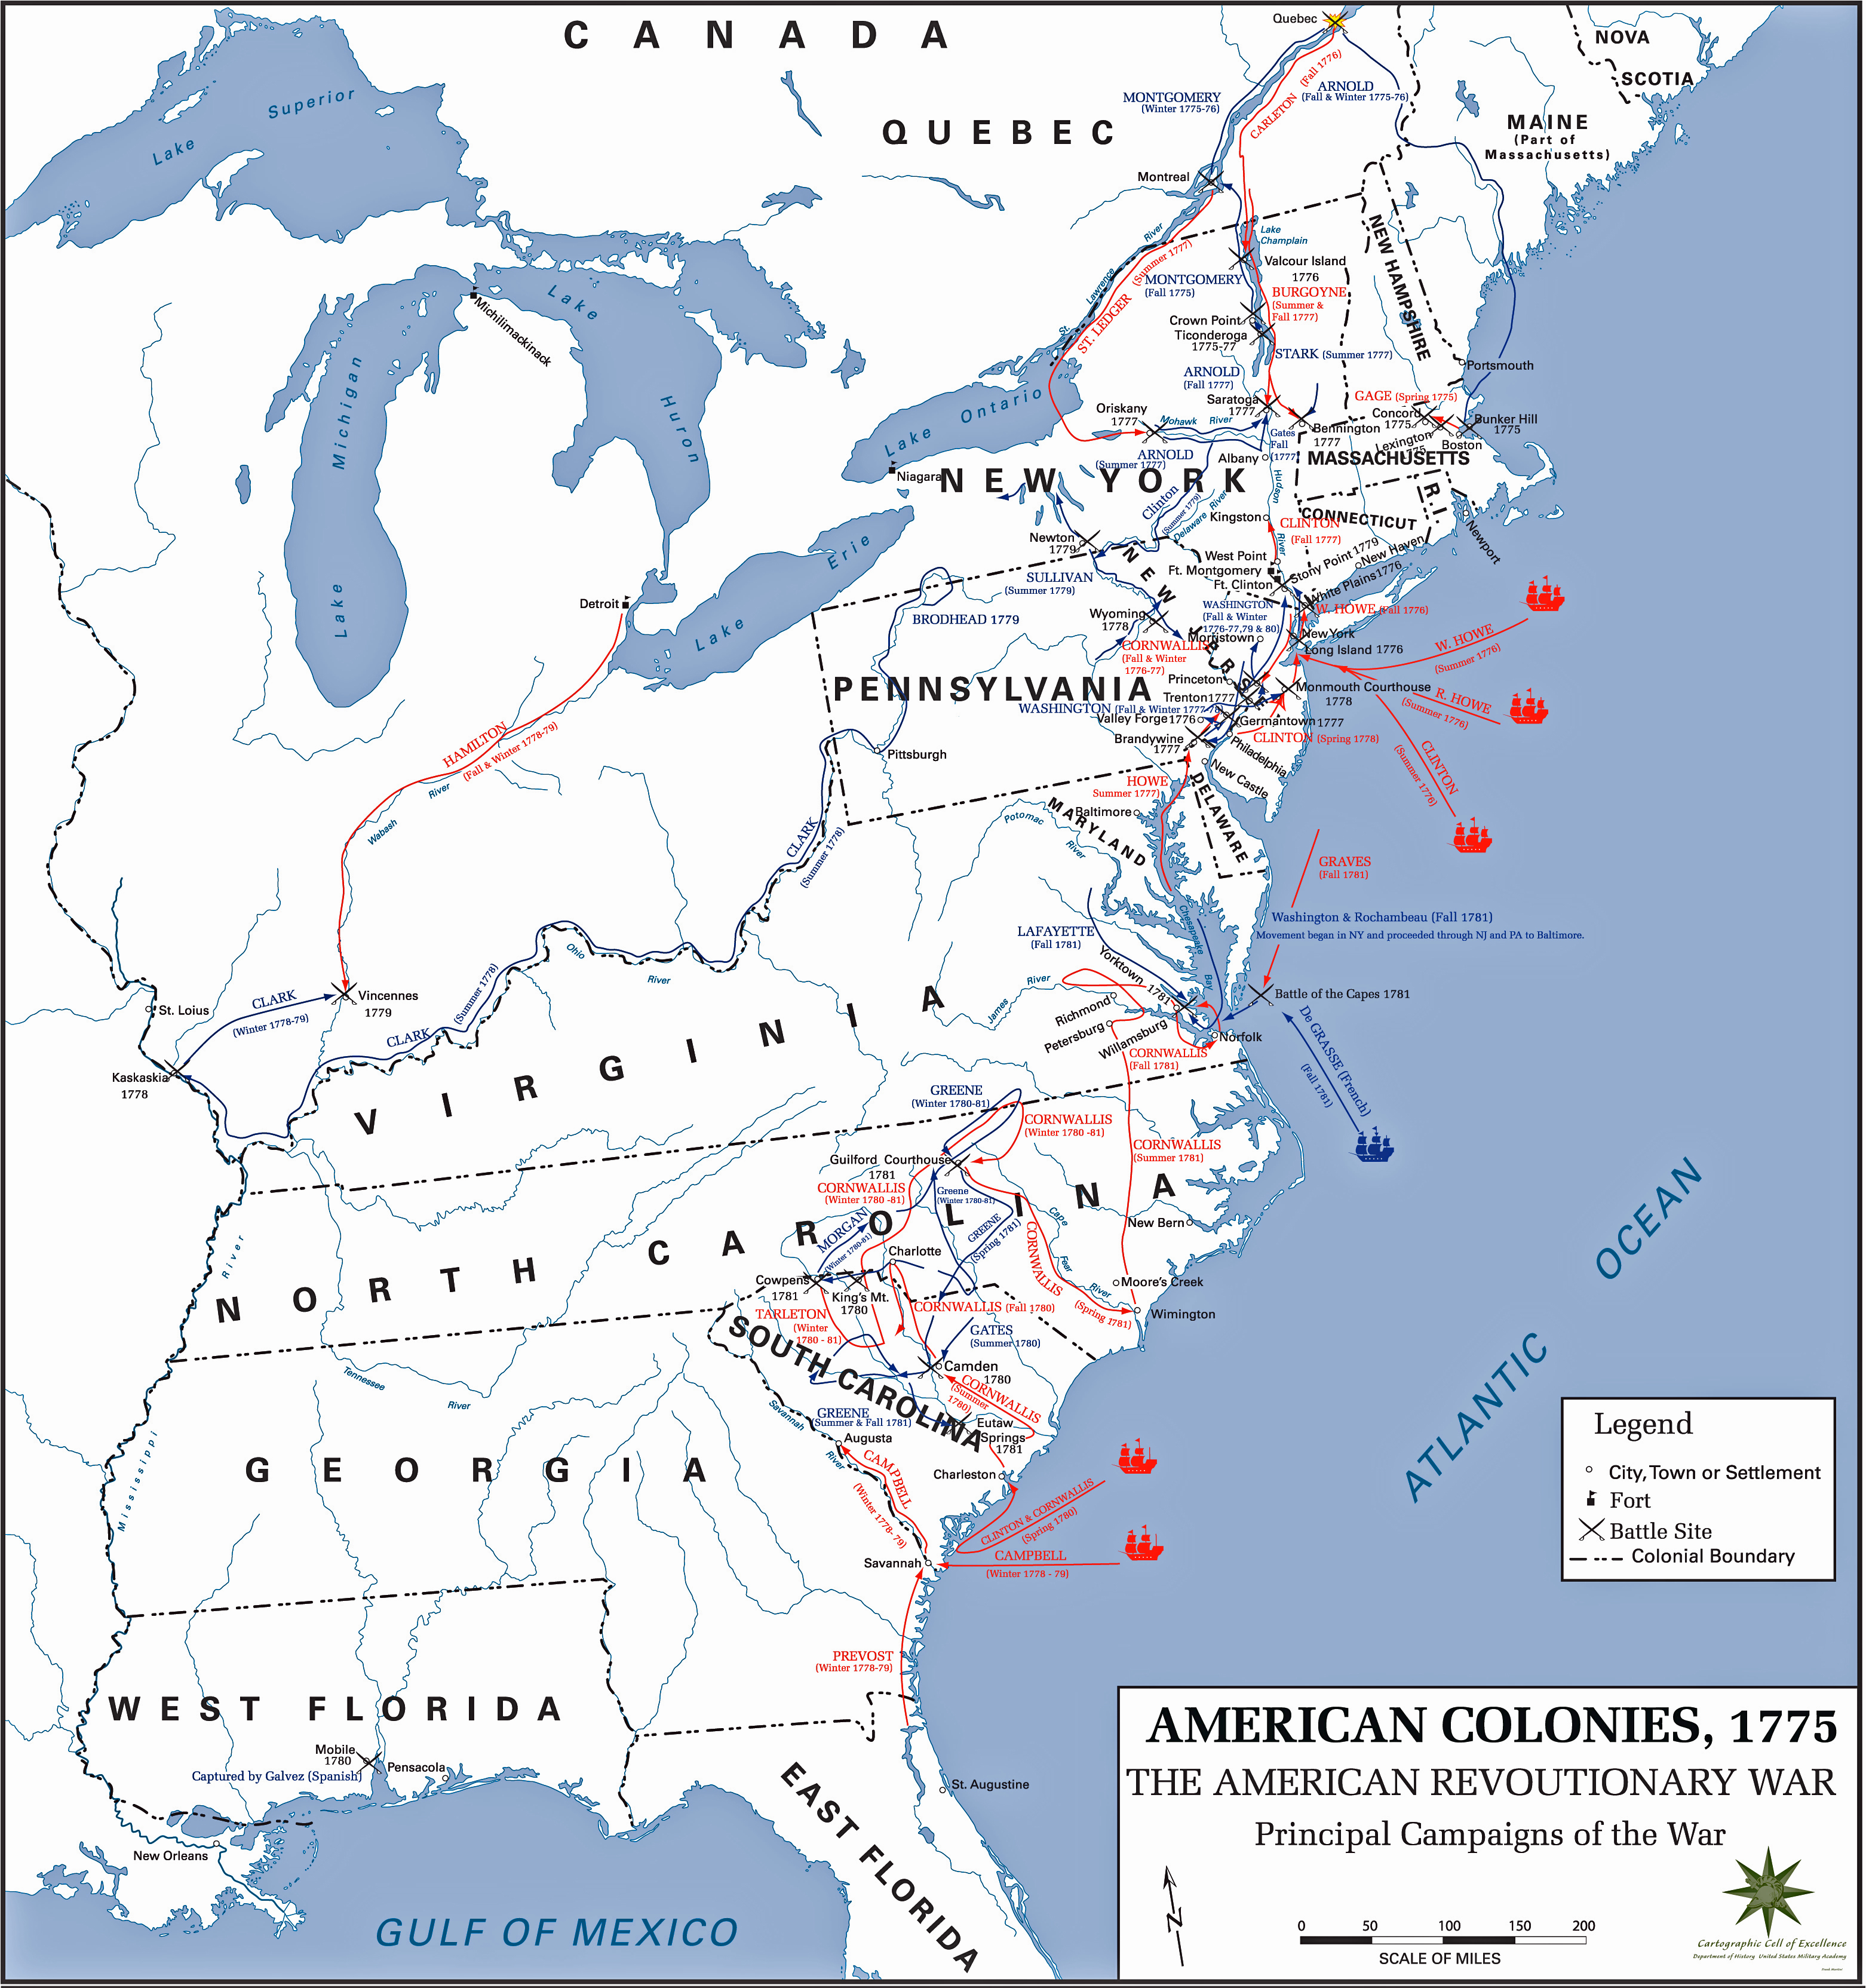 Map of the Principal Campaigns of the American Revolutionary War 1775-1783